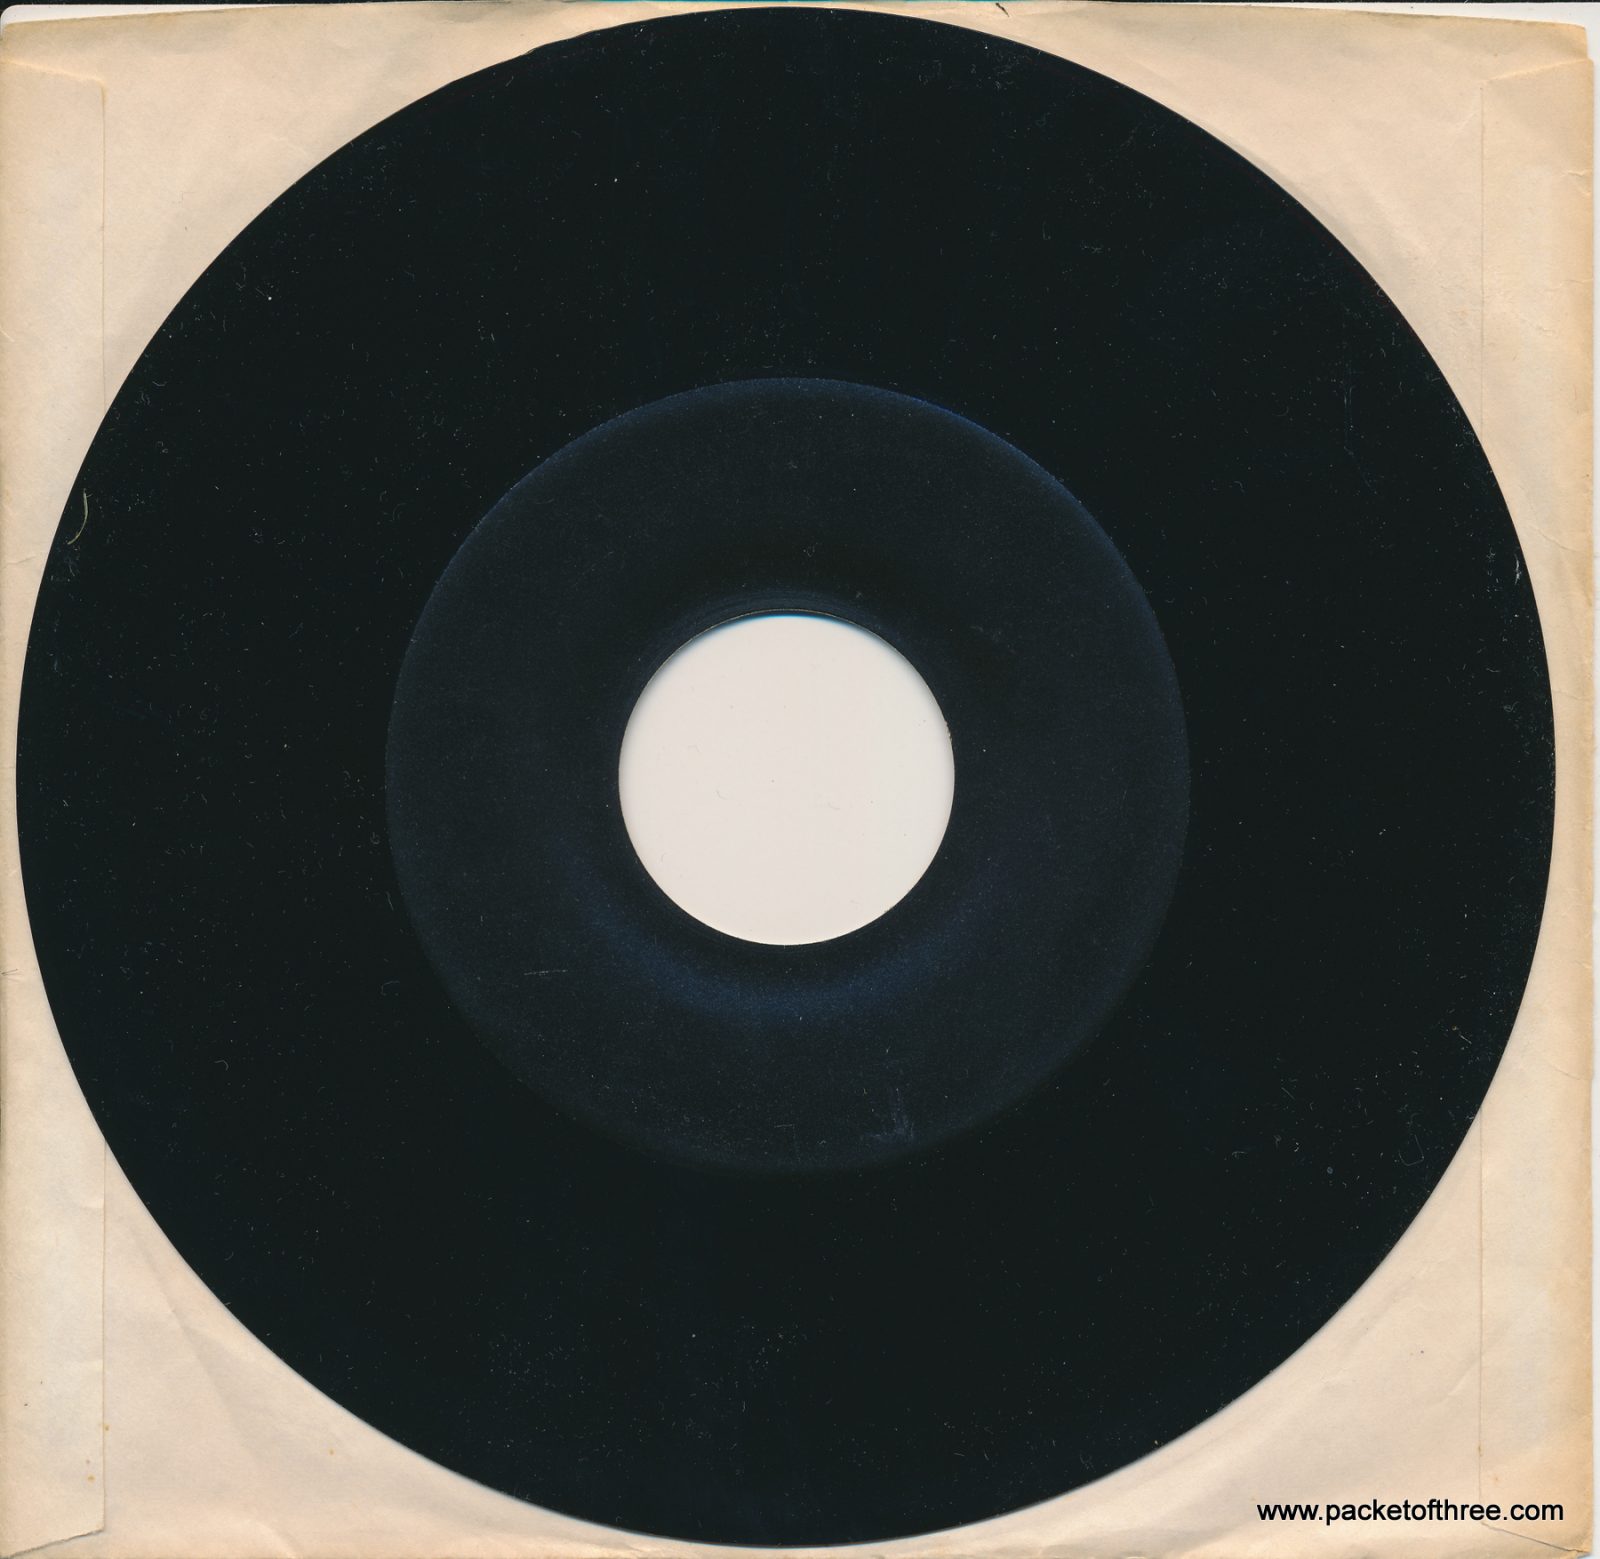 When The Hangover Strikes - USA - 7" - once sided test pressing